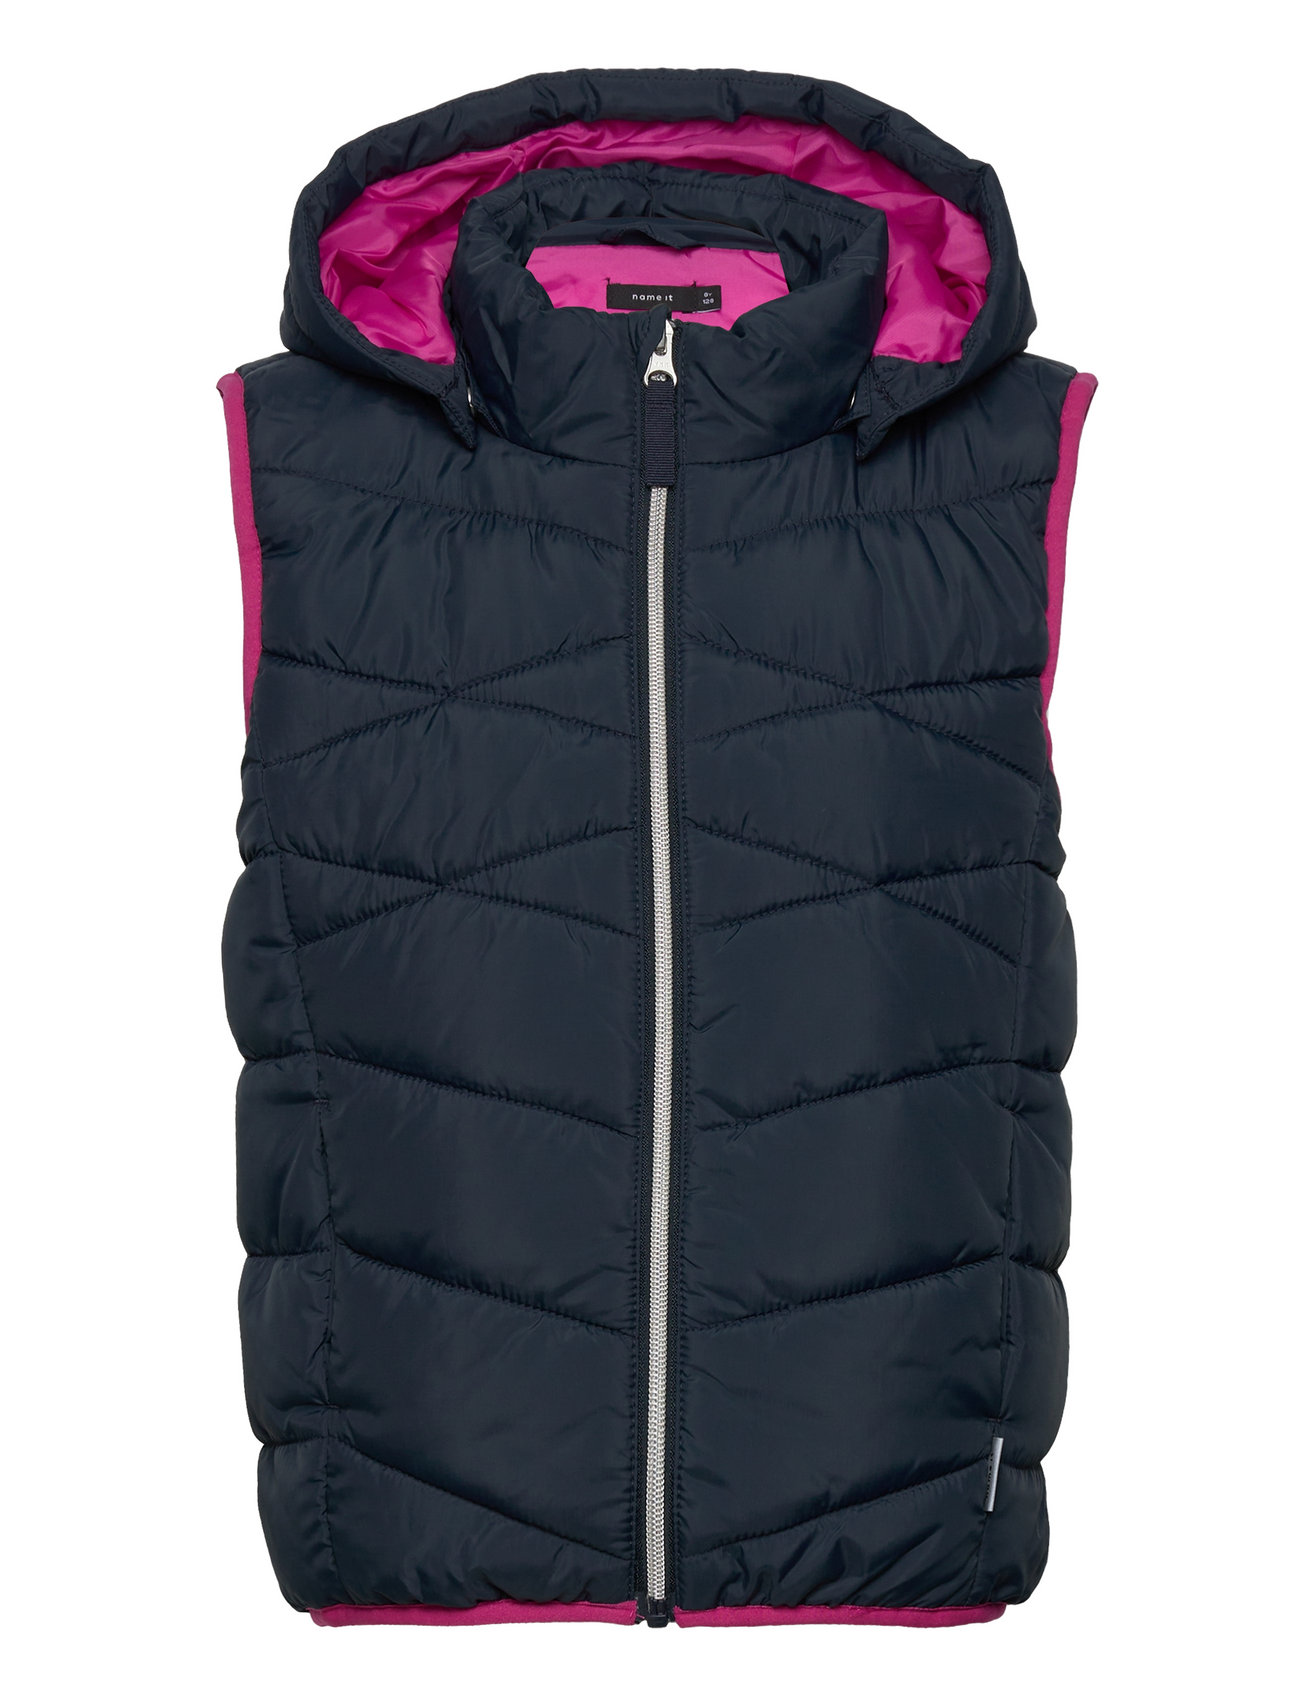 Vest 15.00 returns name it delivery easy - Pb at it online Boozt.com. €. Buy Fast name and Nkfmemphis Vests from